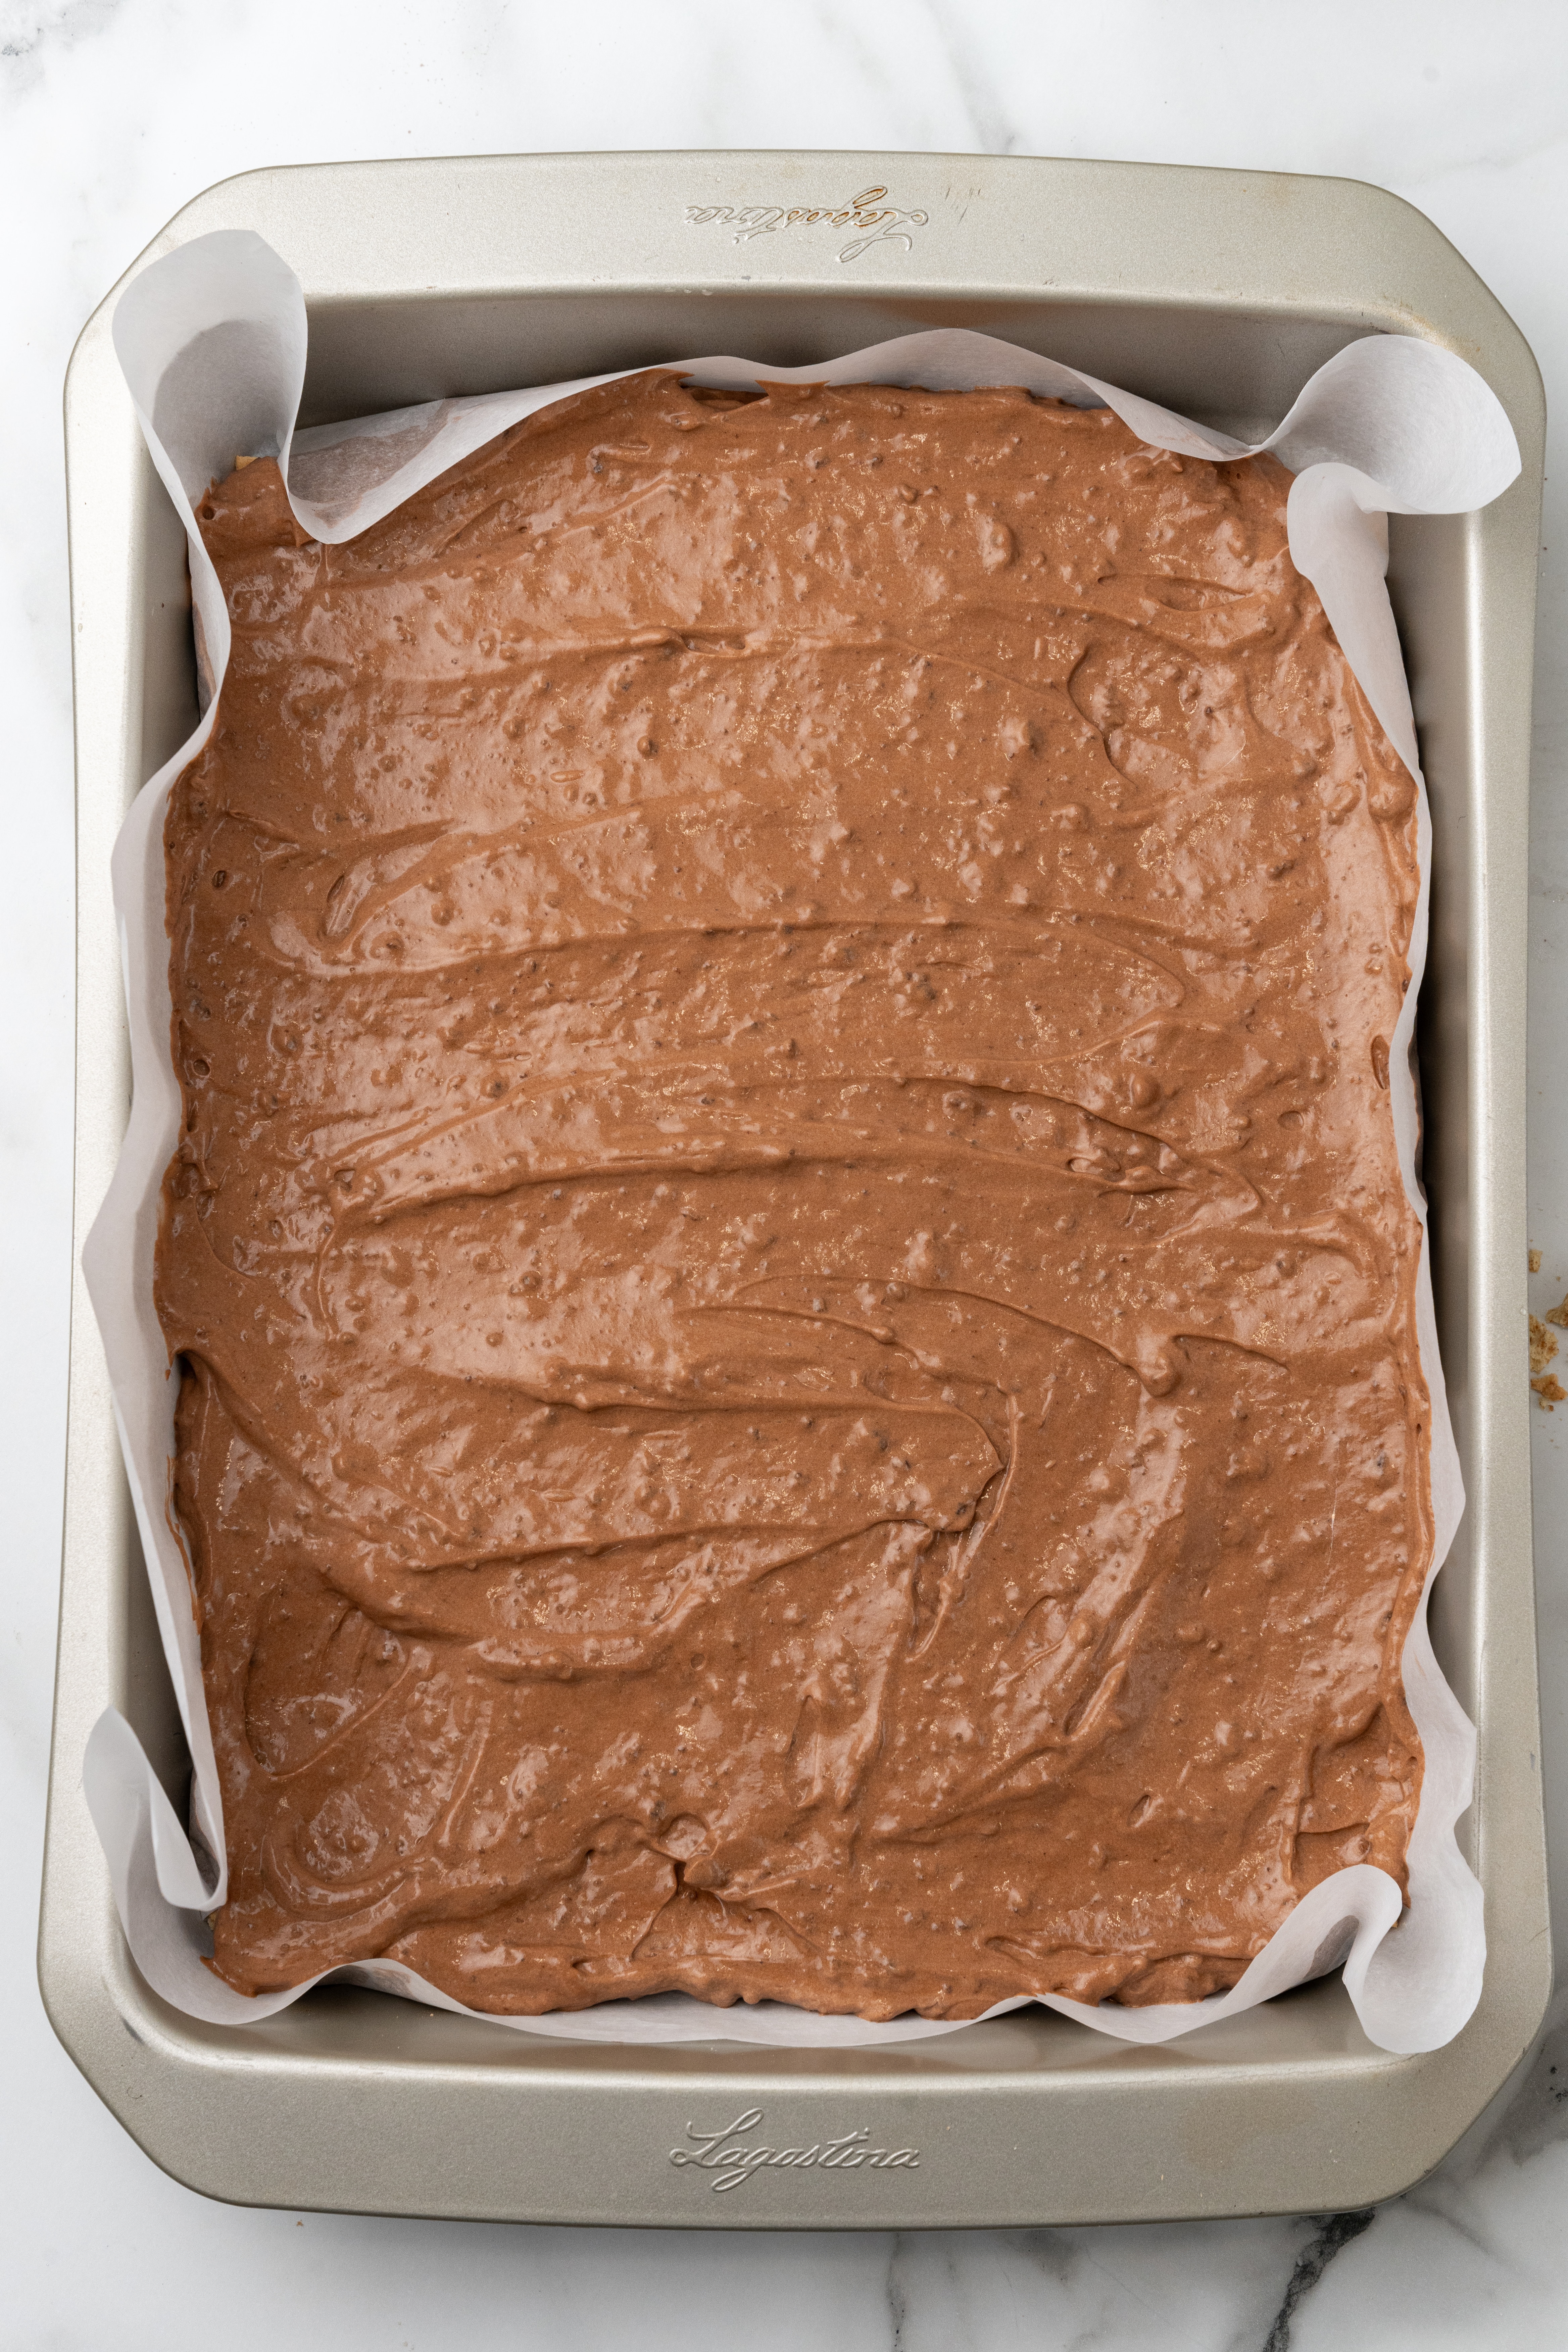 creamy chocolate pudding spread over graham crackers in a parchment paper lined baking pan